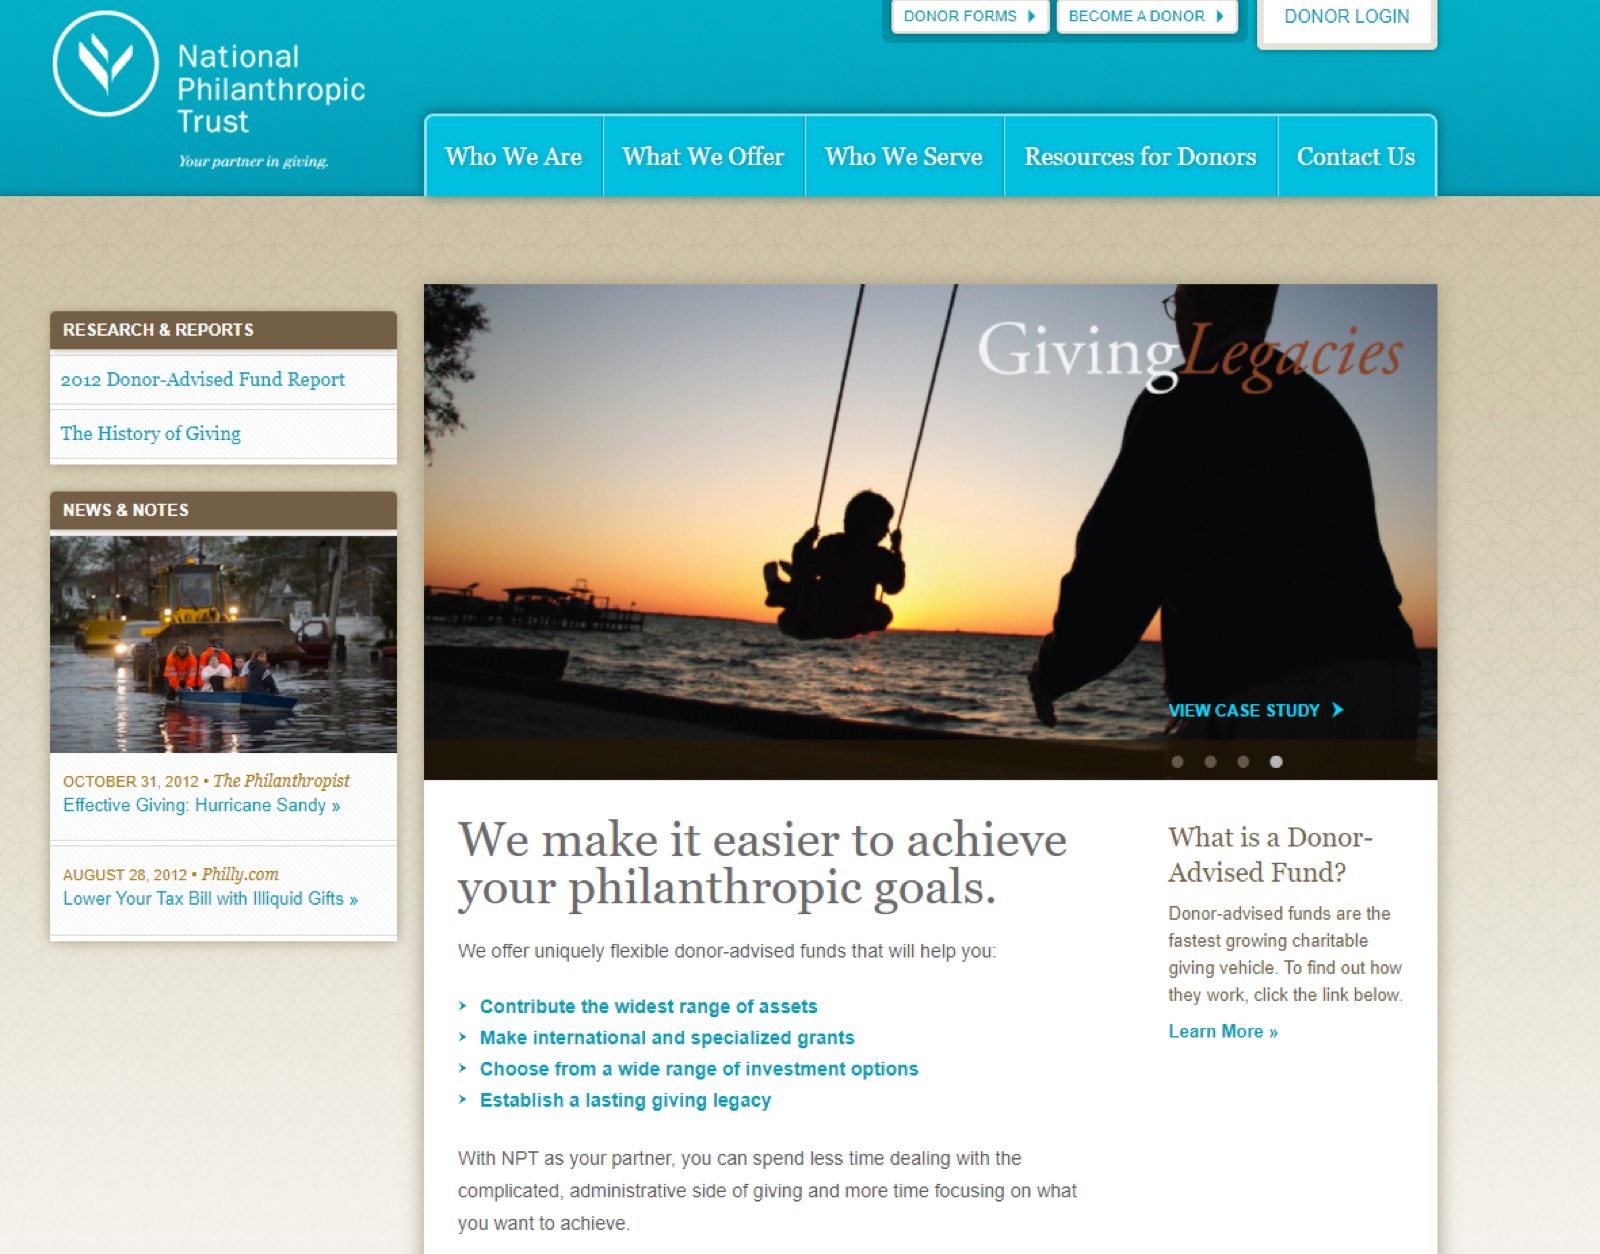 Screenshot from the Giving Legacies page of the 2012 version of the NPT website.